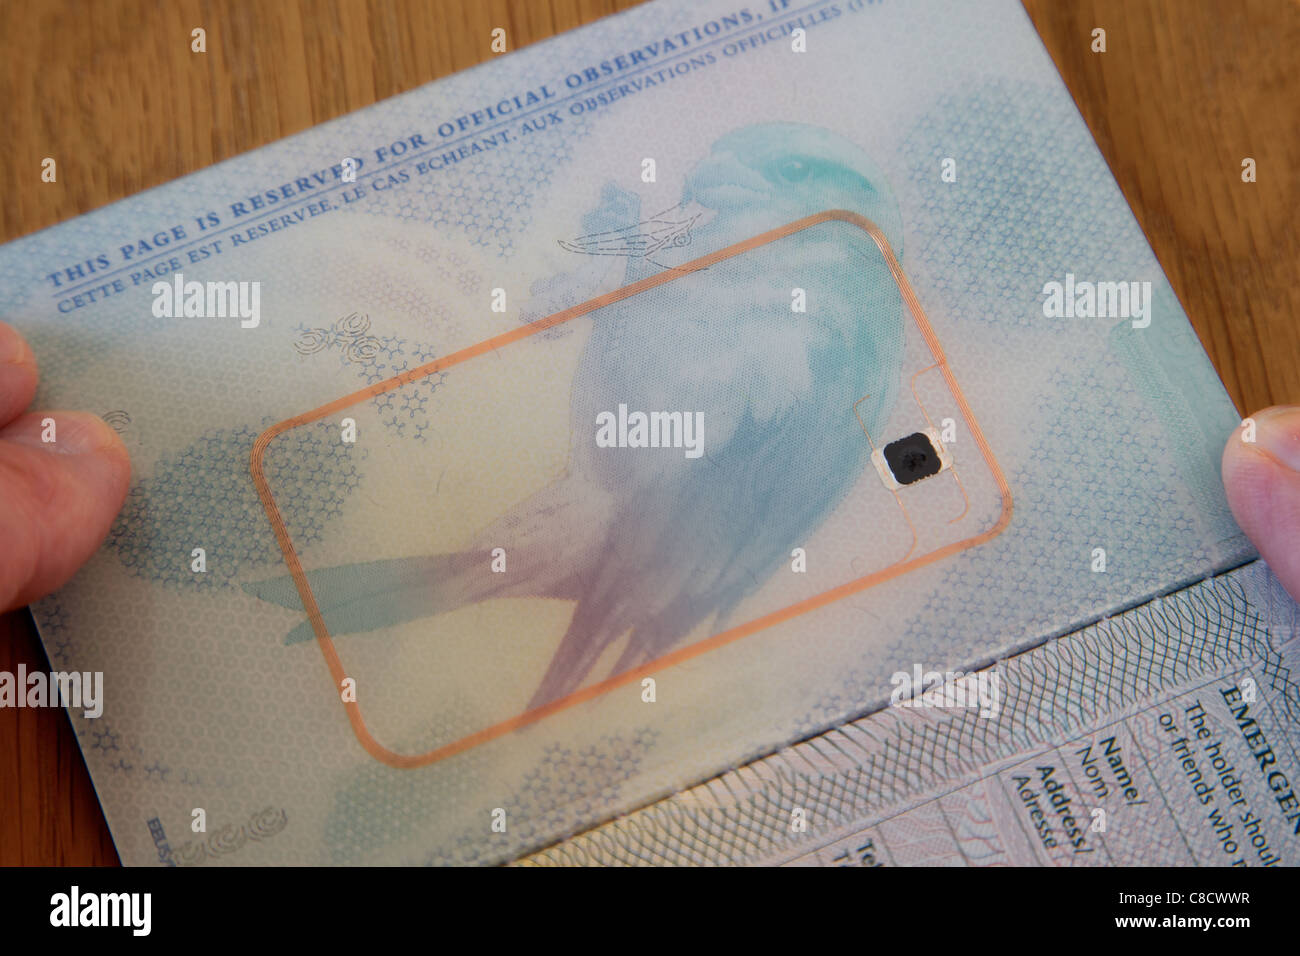 The chip on a biometric passport, also known as an e-passport or ePassport, England Stock Photo